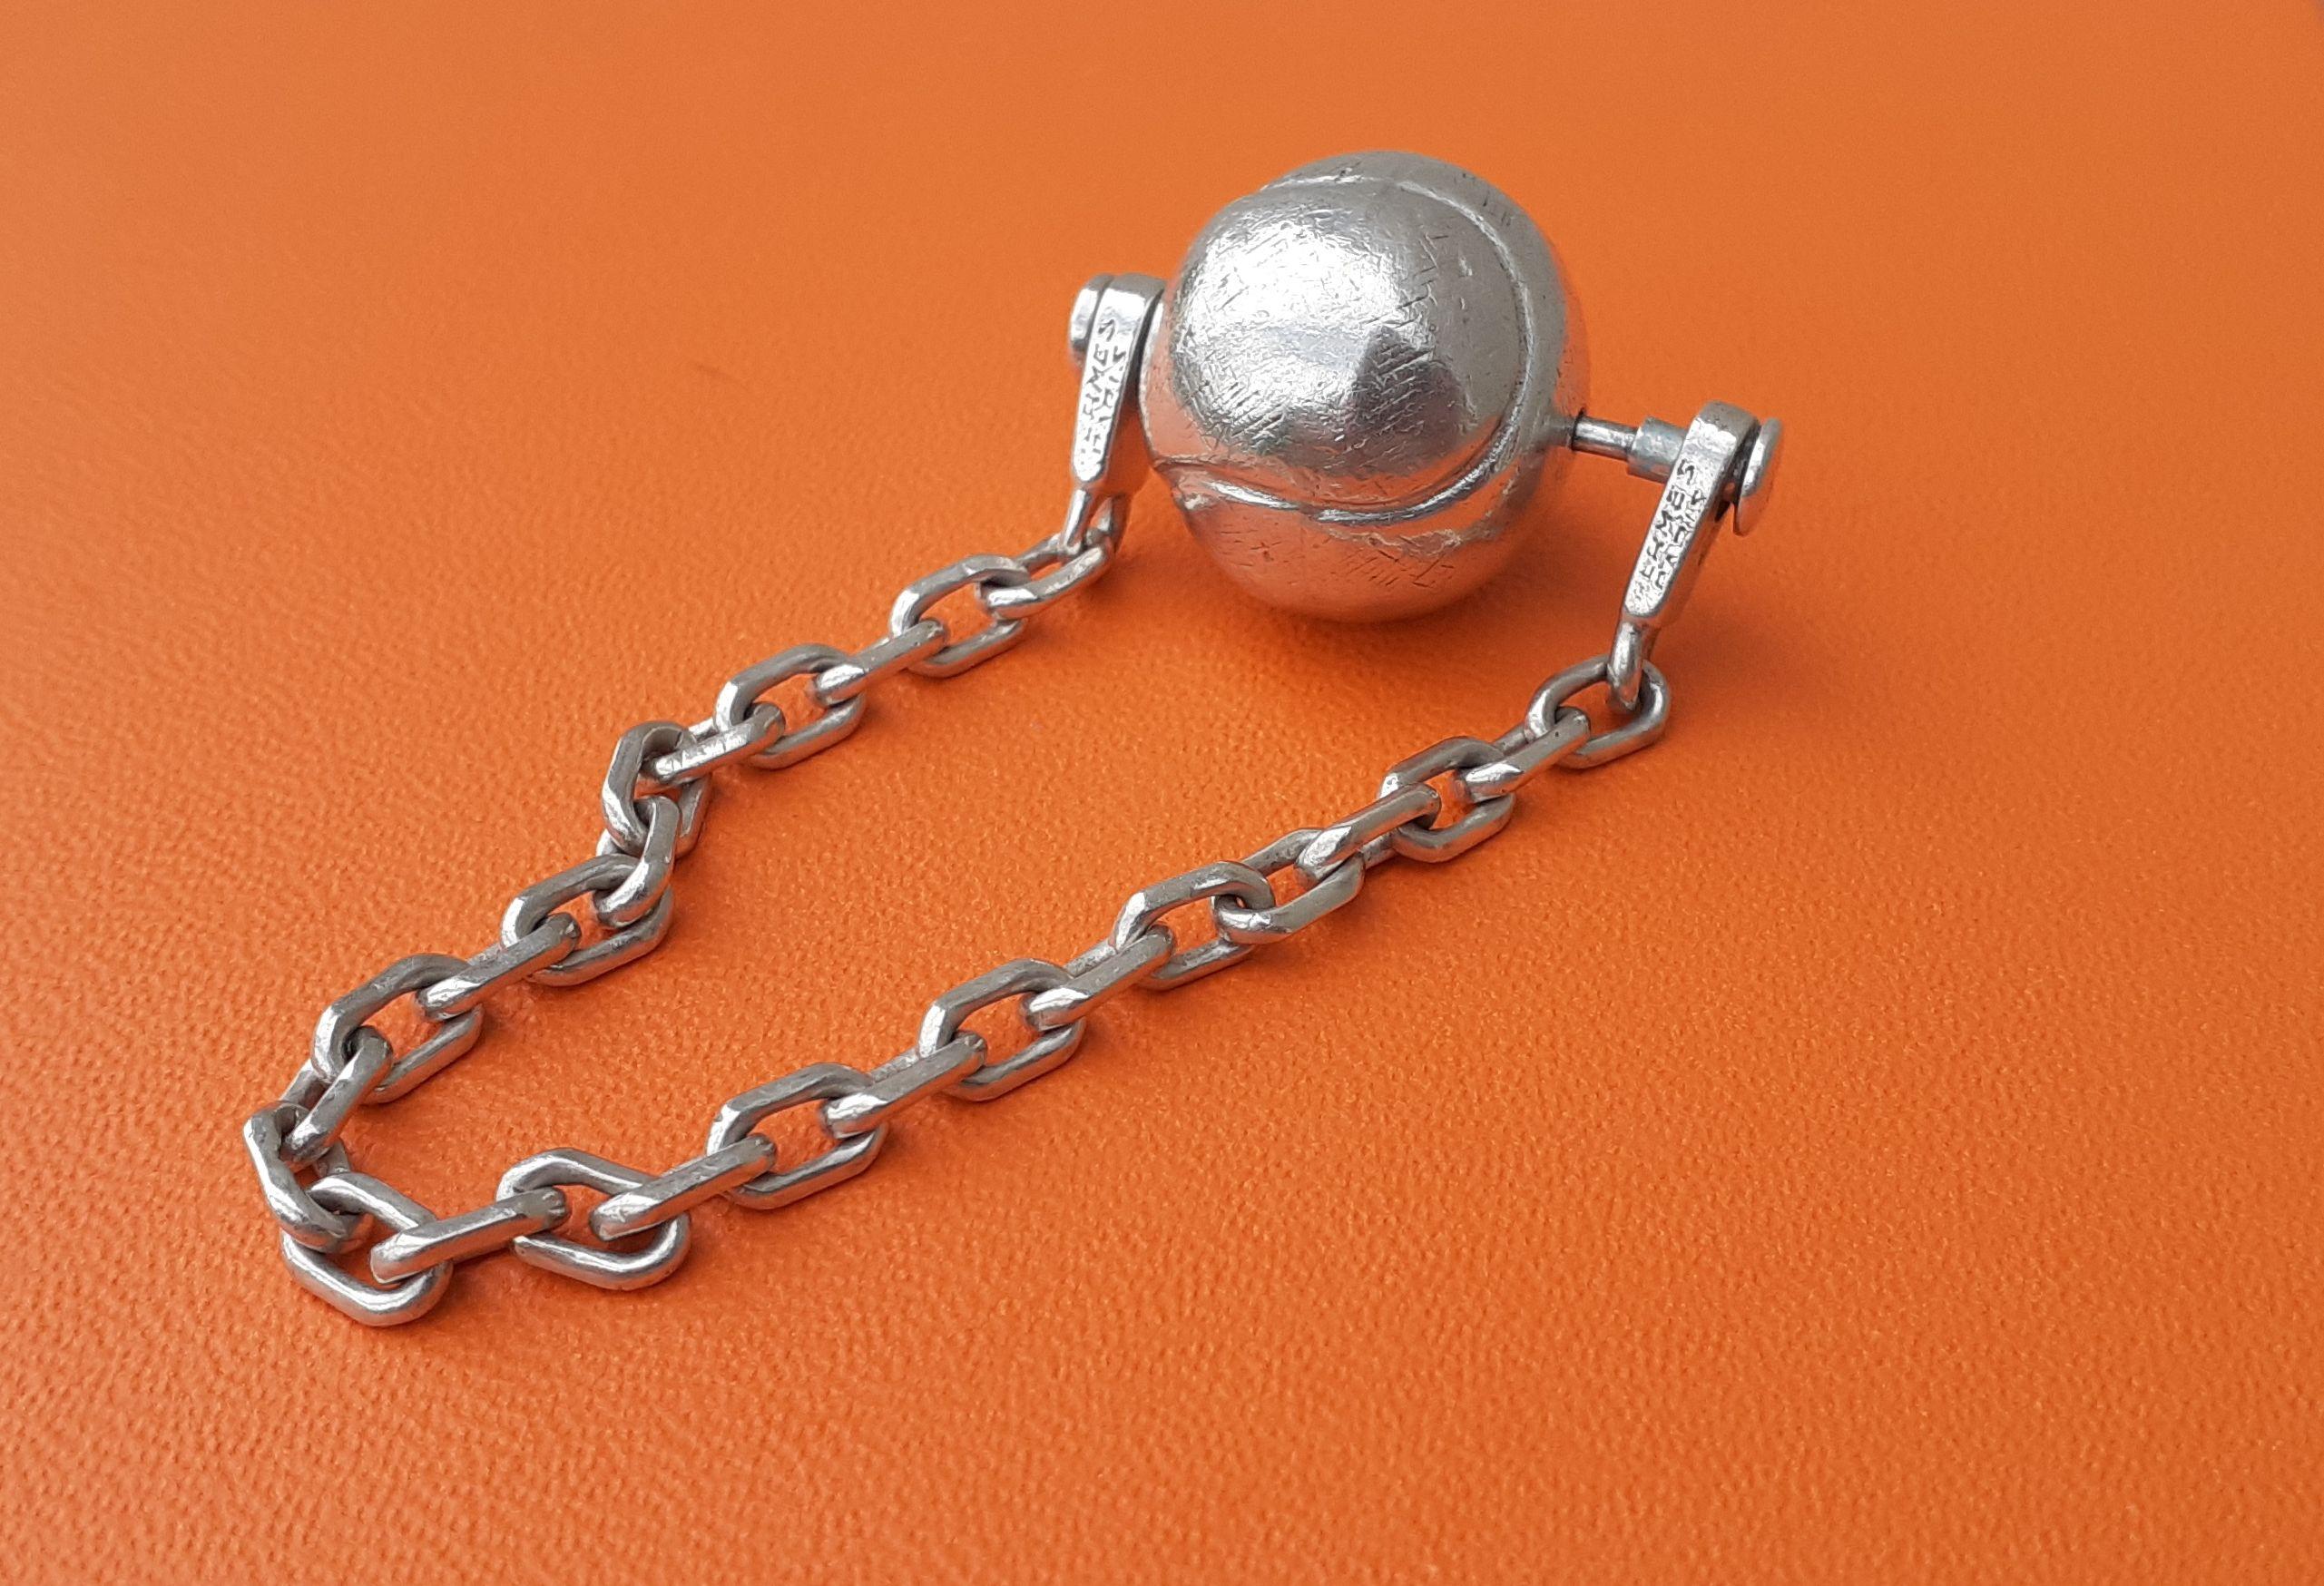 Exceptional Hermès Vintage Tennis Ball Key Ring Keychain in Silver Rare For Sale 7